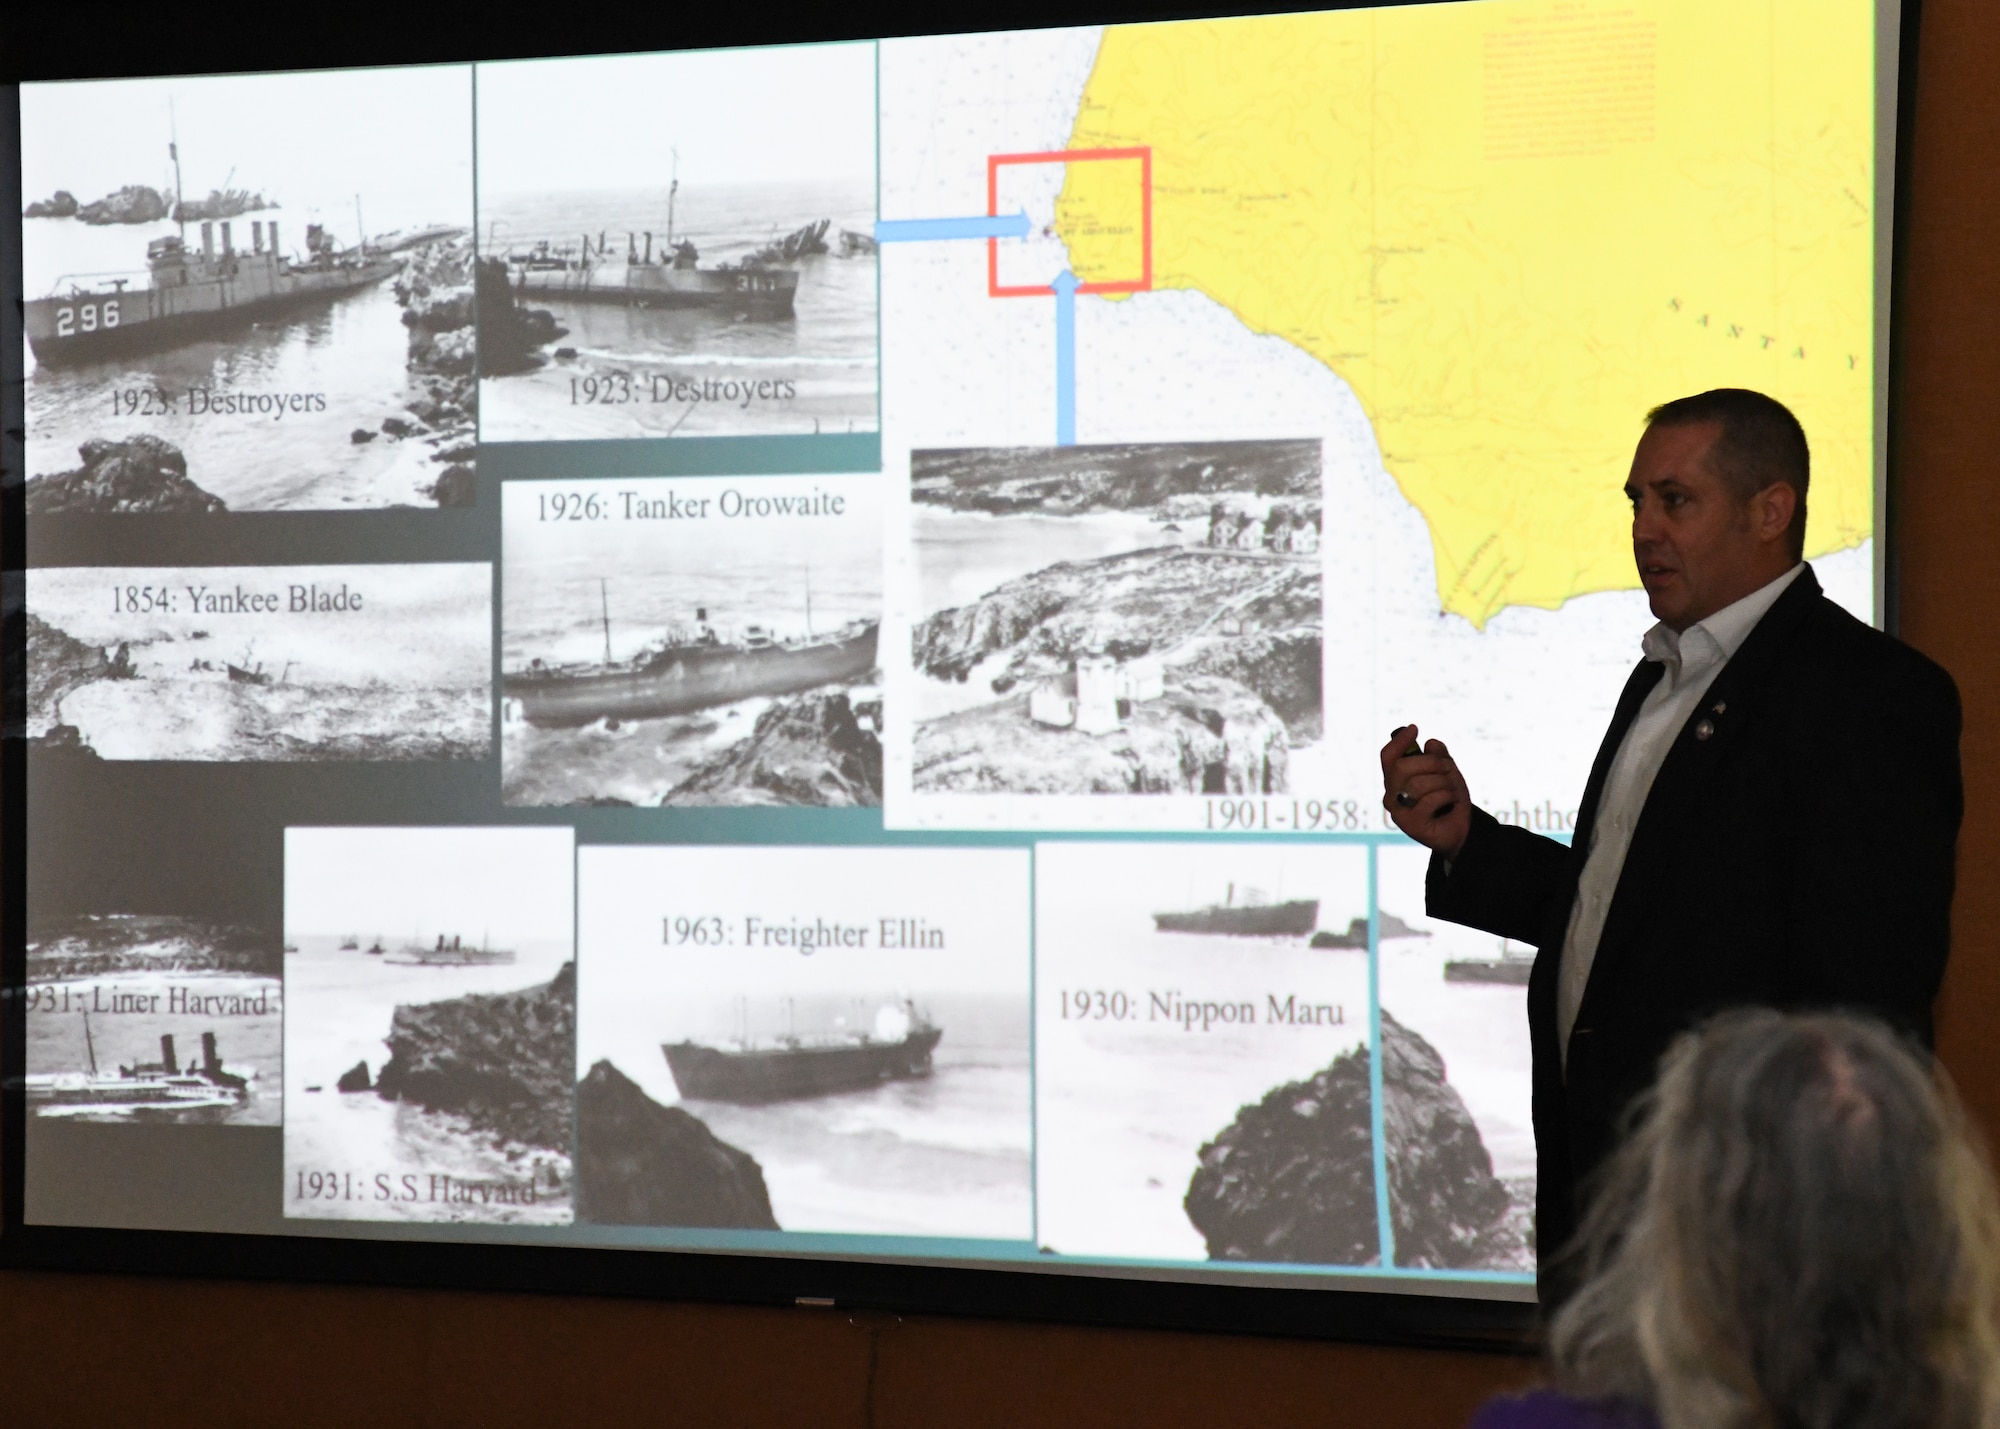 During a presentation held at the base library on Sept. 7, 2023, Dr. Scott Bailey, deputy command historian for Space Operations Command, and former Space Launch Delta 30 historian, shed light on the historical context and significance of the Honda Point shipwreck tragedy. This devastating incident unfolded off the base's coastline where seven U.S. Navy destroyers ran aground at Honda Point, resulting in the tragic loss of 23 sailors' lives. On Sept. 8, 2023, the base commemorated the 100th anniversary of the tragedy by lowering the flags to half-staff and playing Taps at 9:05 p.m., aligning with the precise moment of the disaster. (U.S. Space Force photo by Senior Airman Rocio Romo)